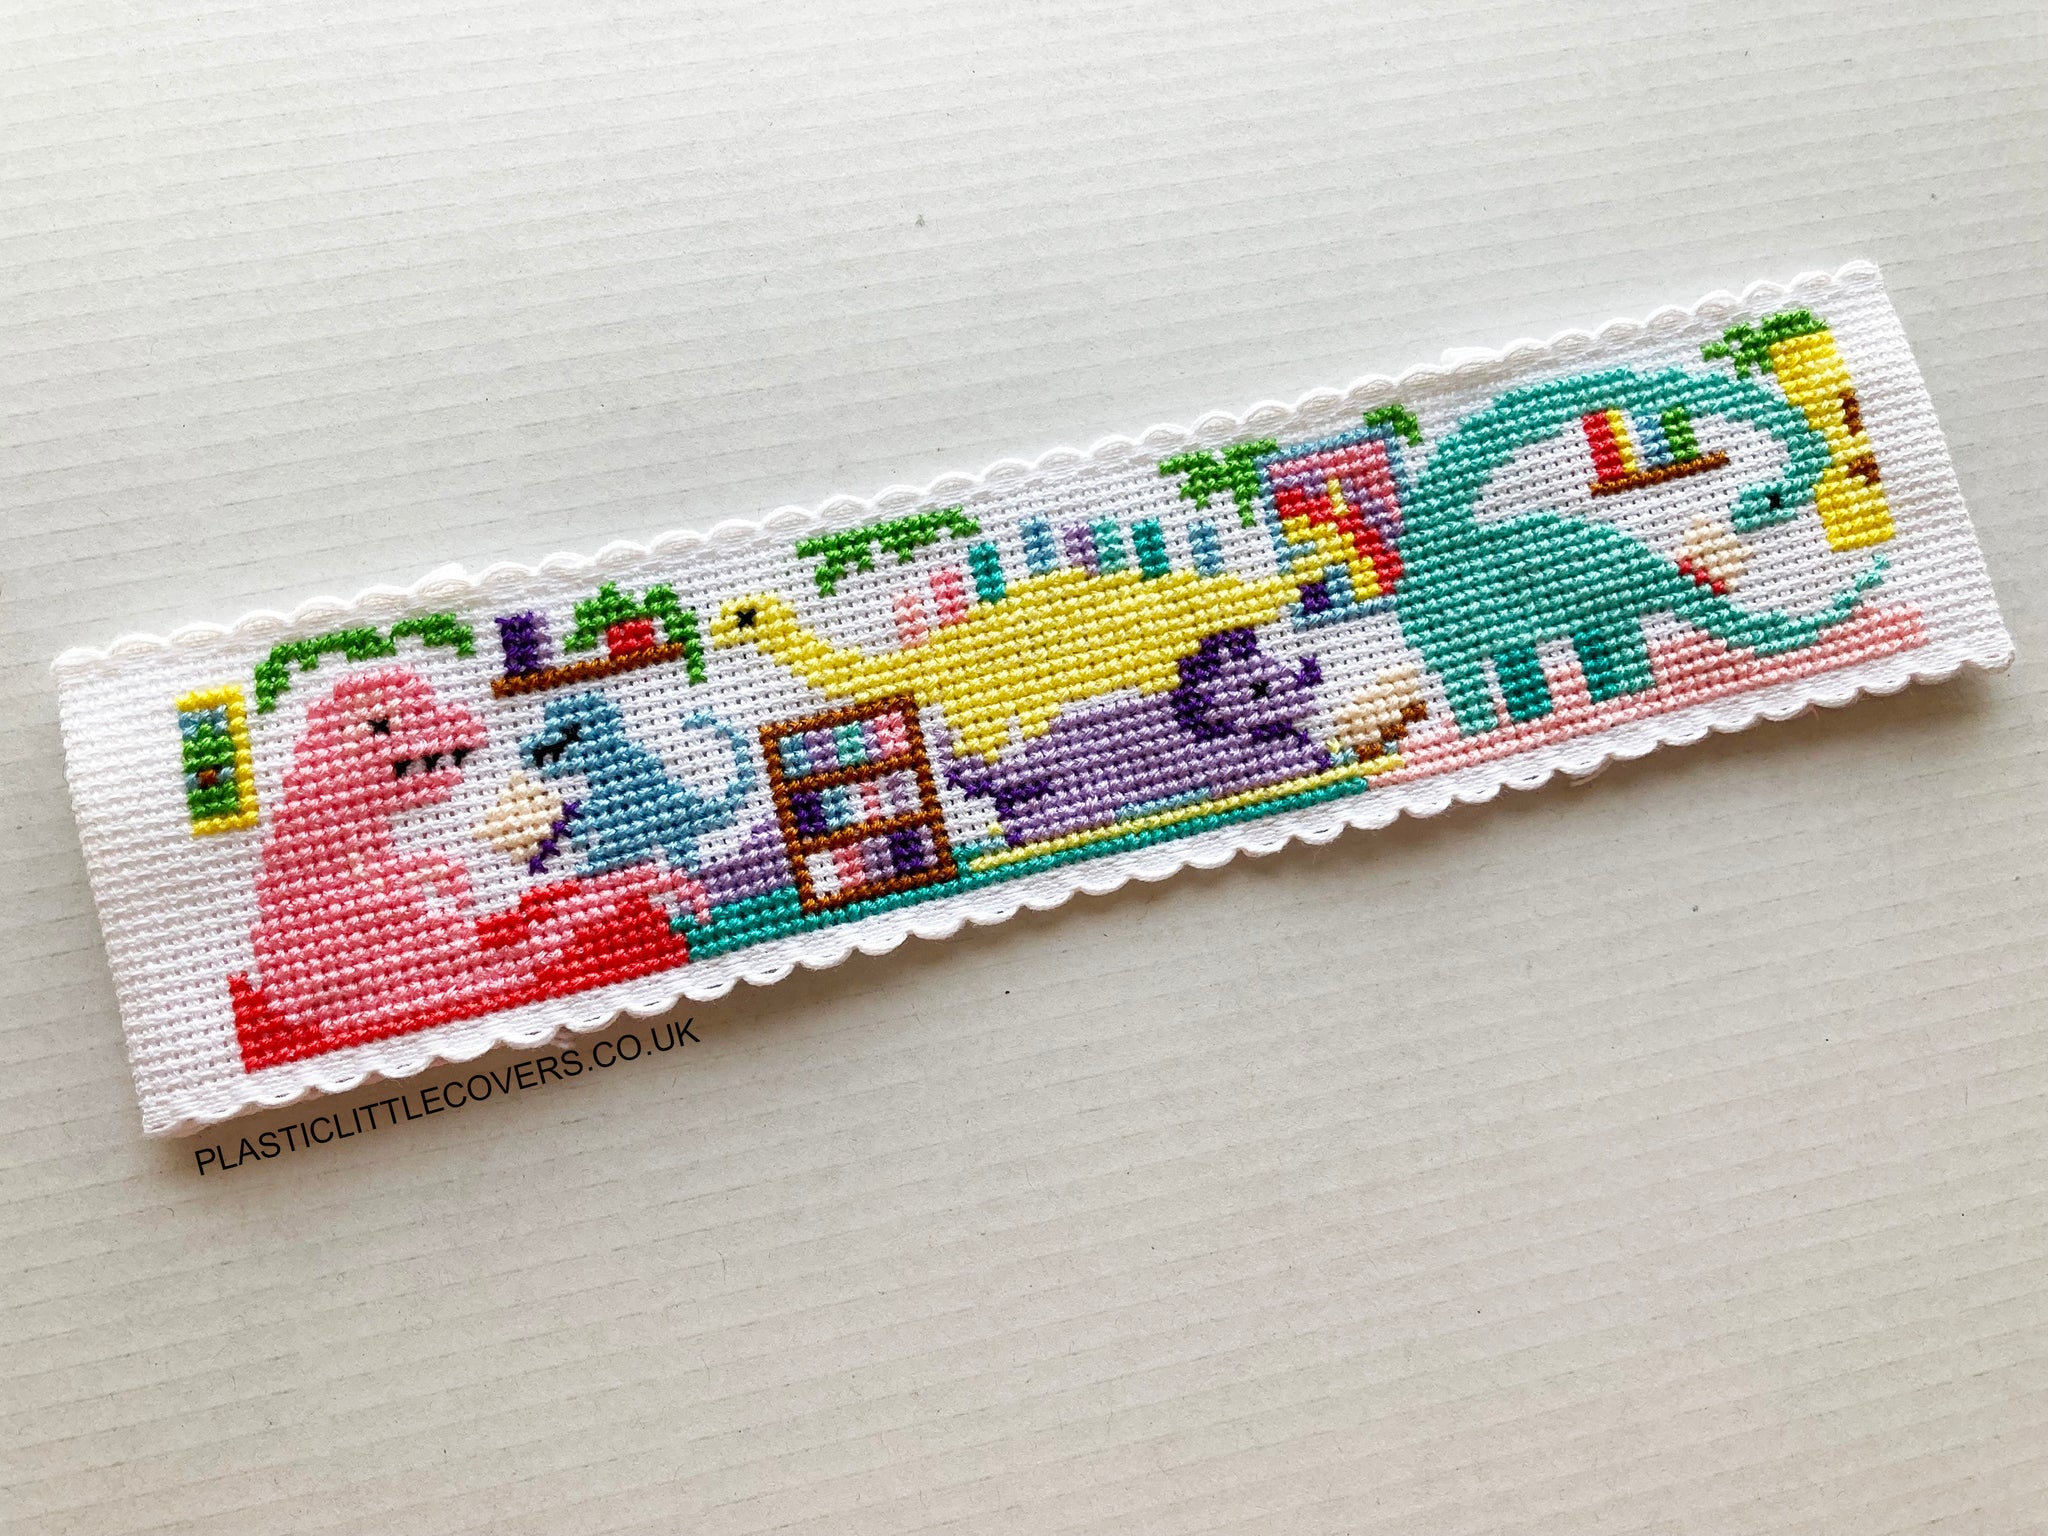 Counted Cross Stitch Bookmark Kit, cute ready-made bookmarks, fun